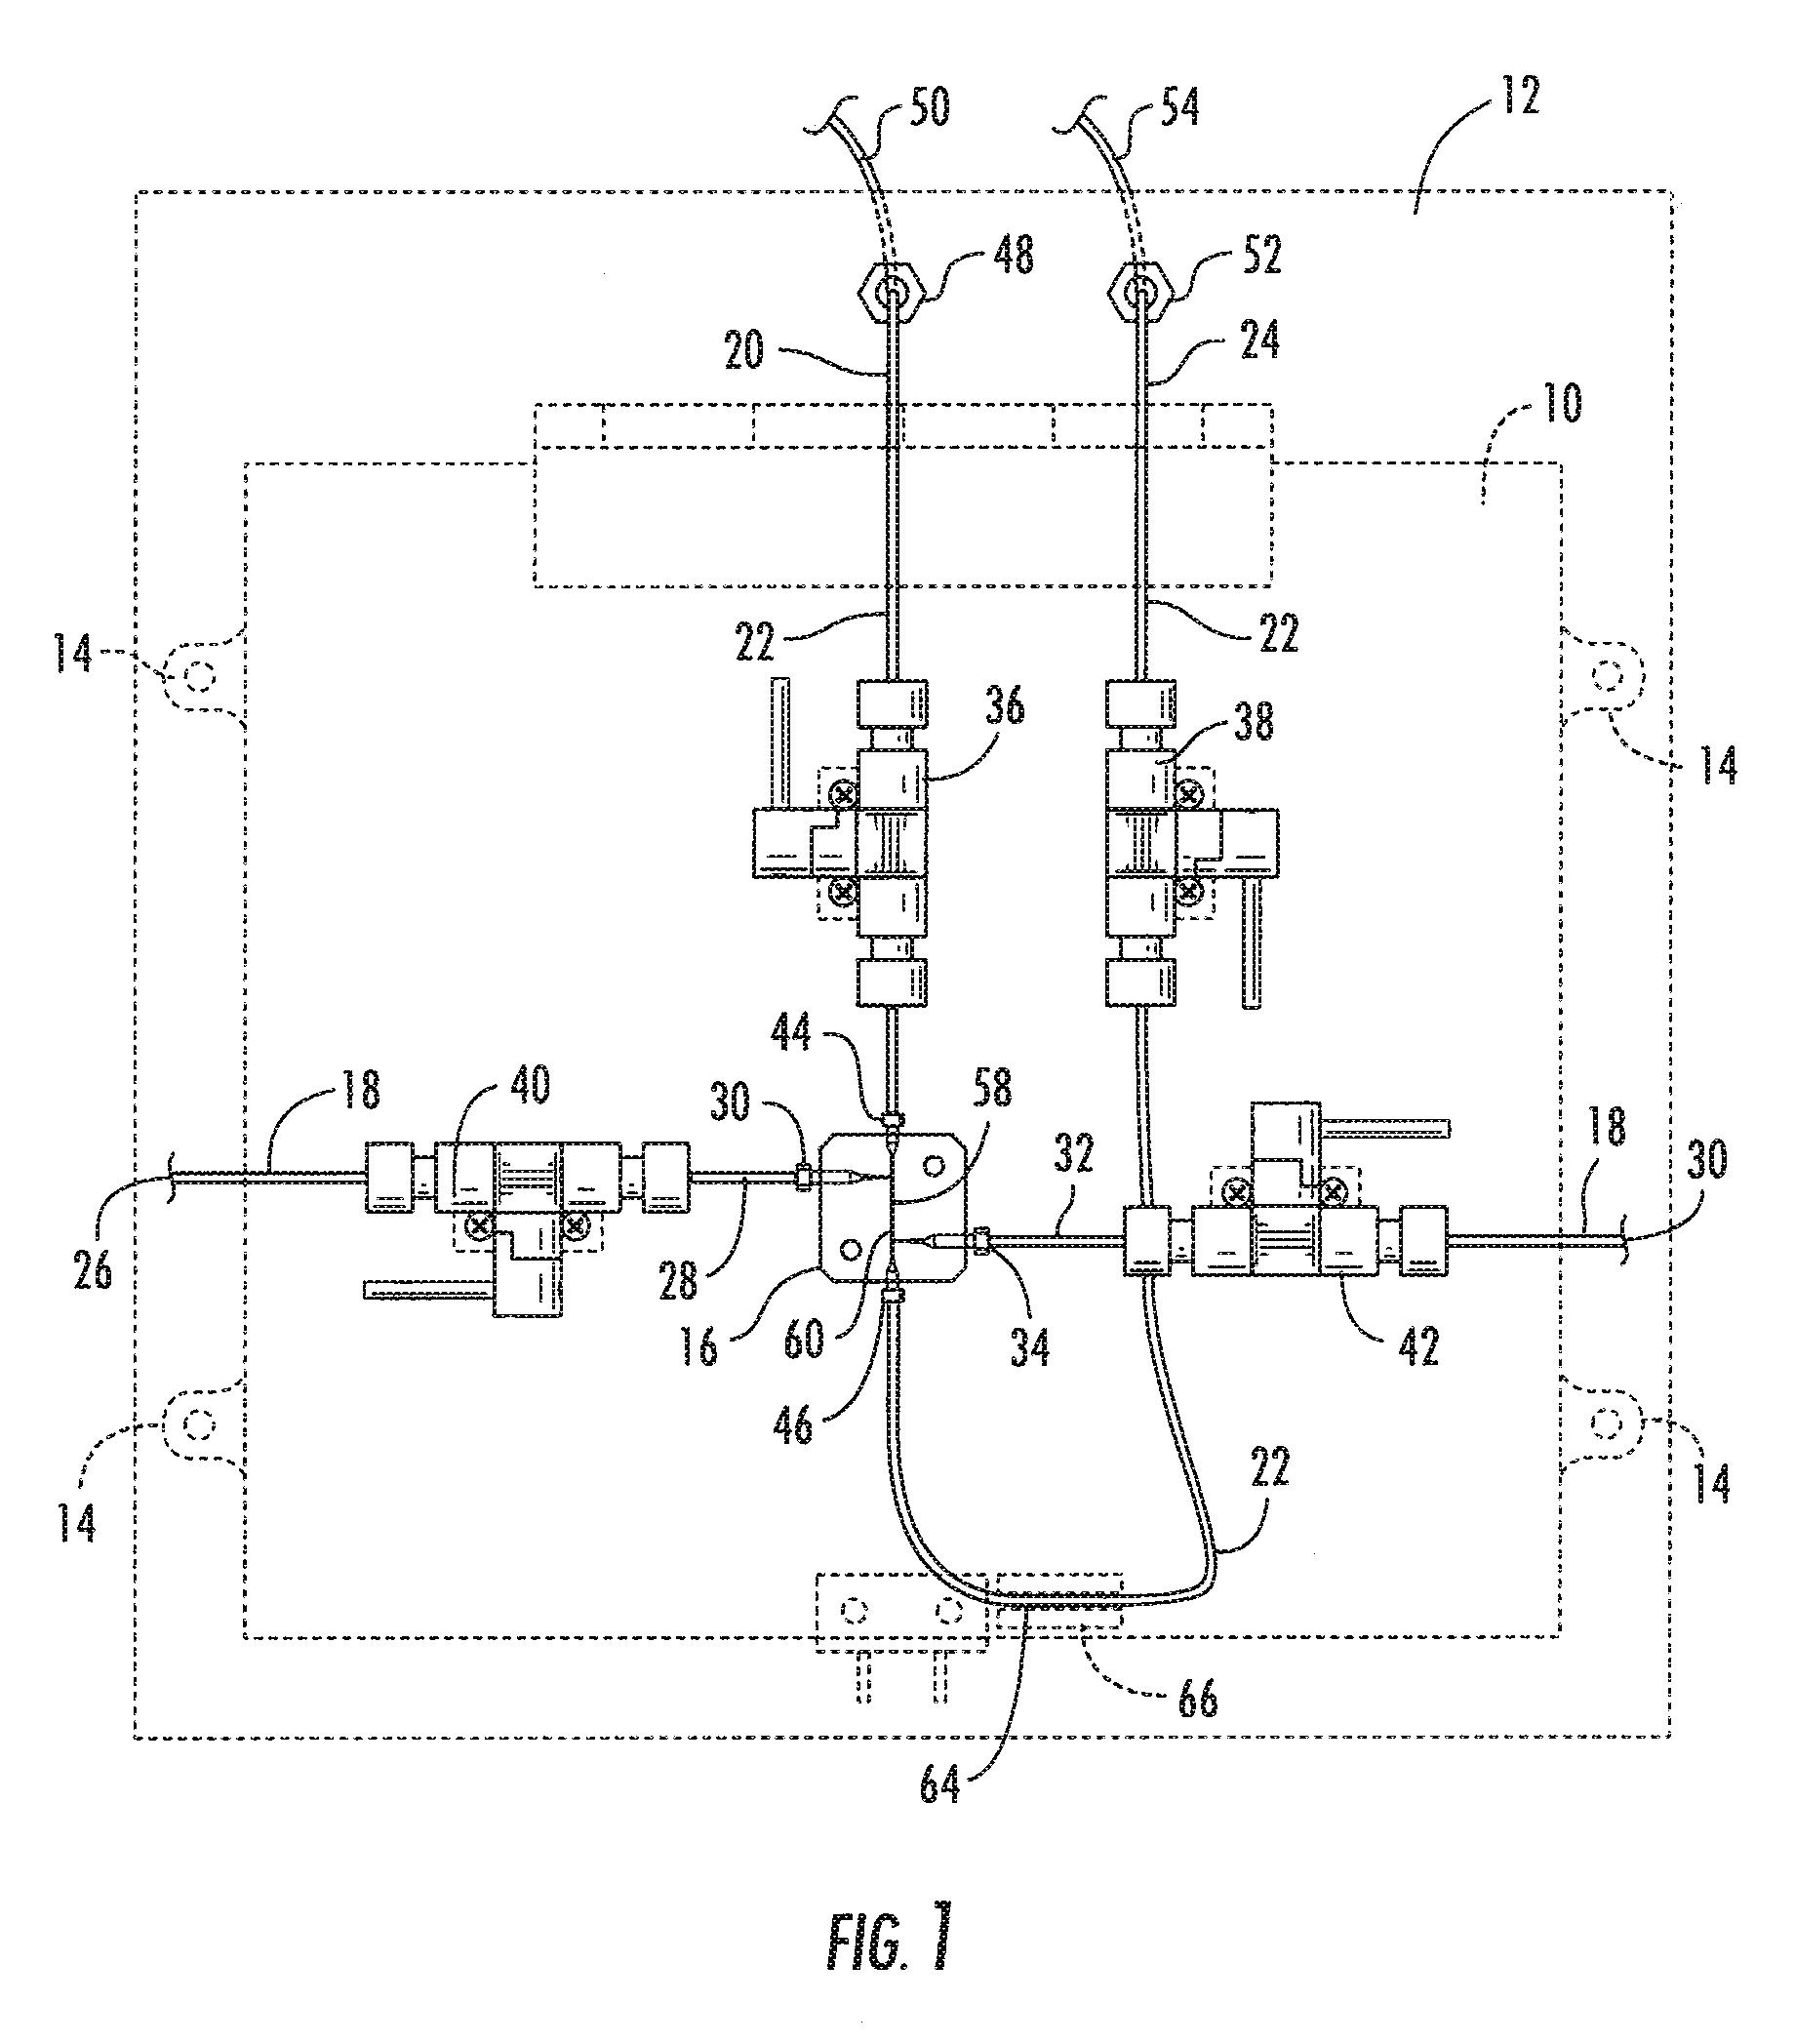 Integrated modular unit including an analyte concentrator-microreactor device connected to a cartridge-cassette